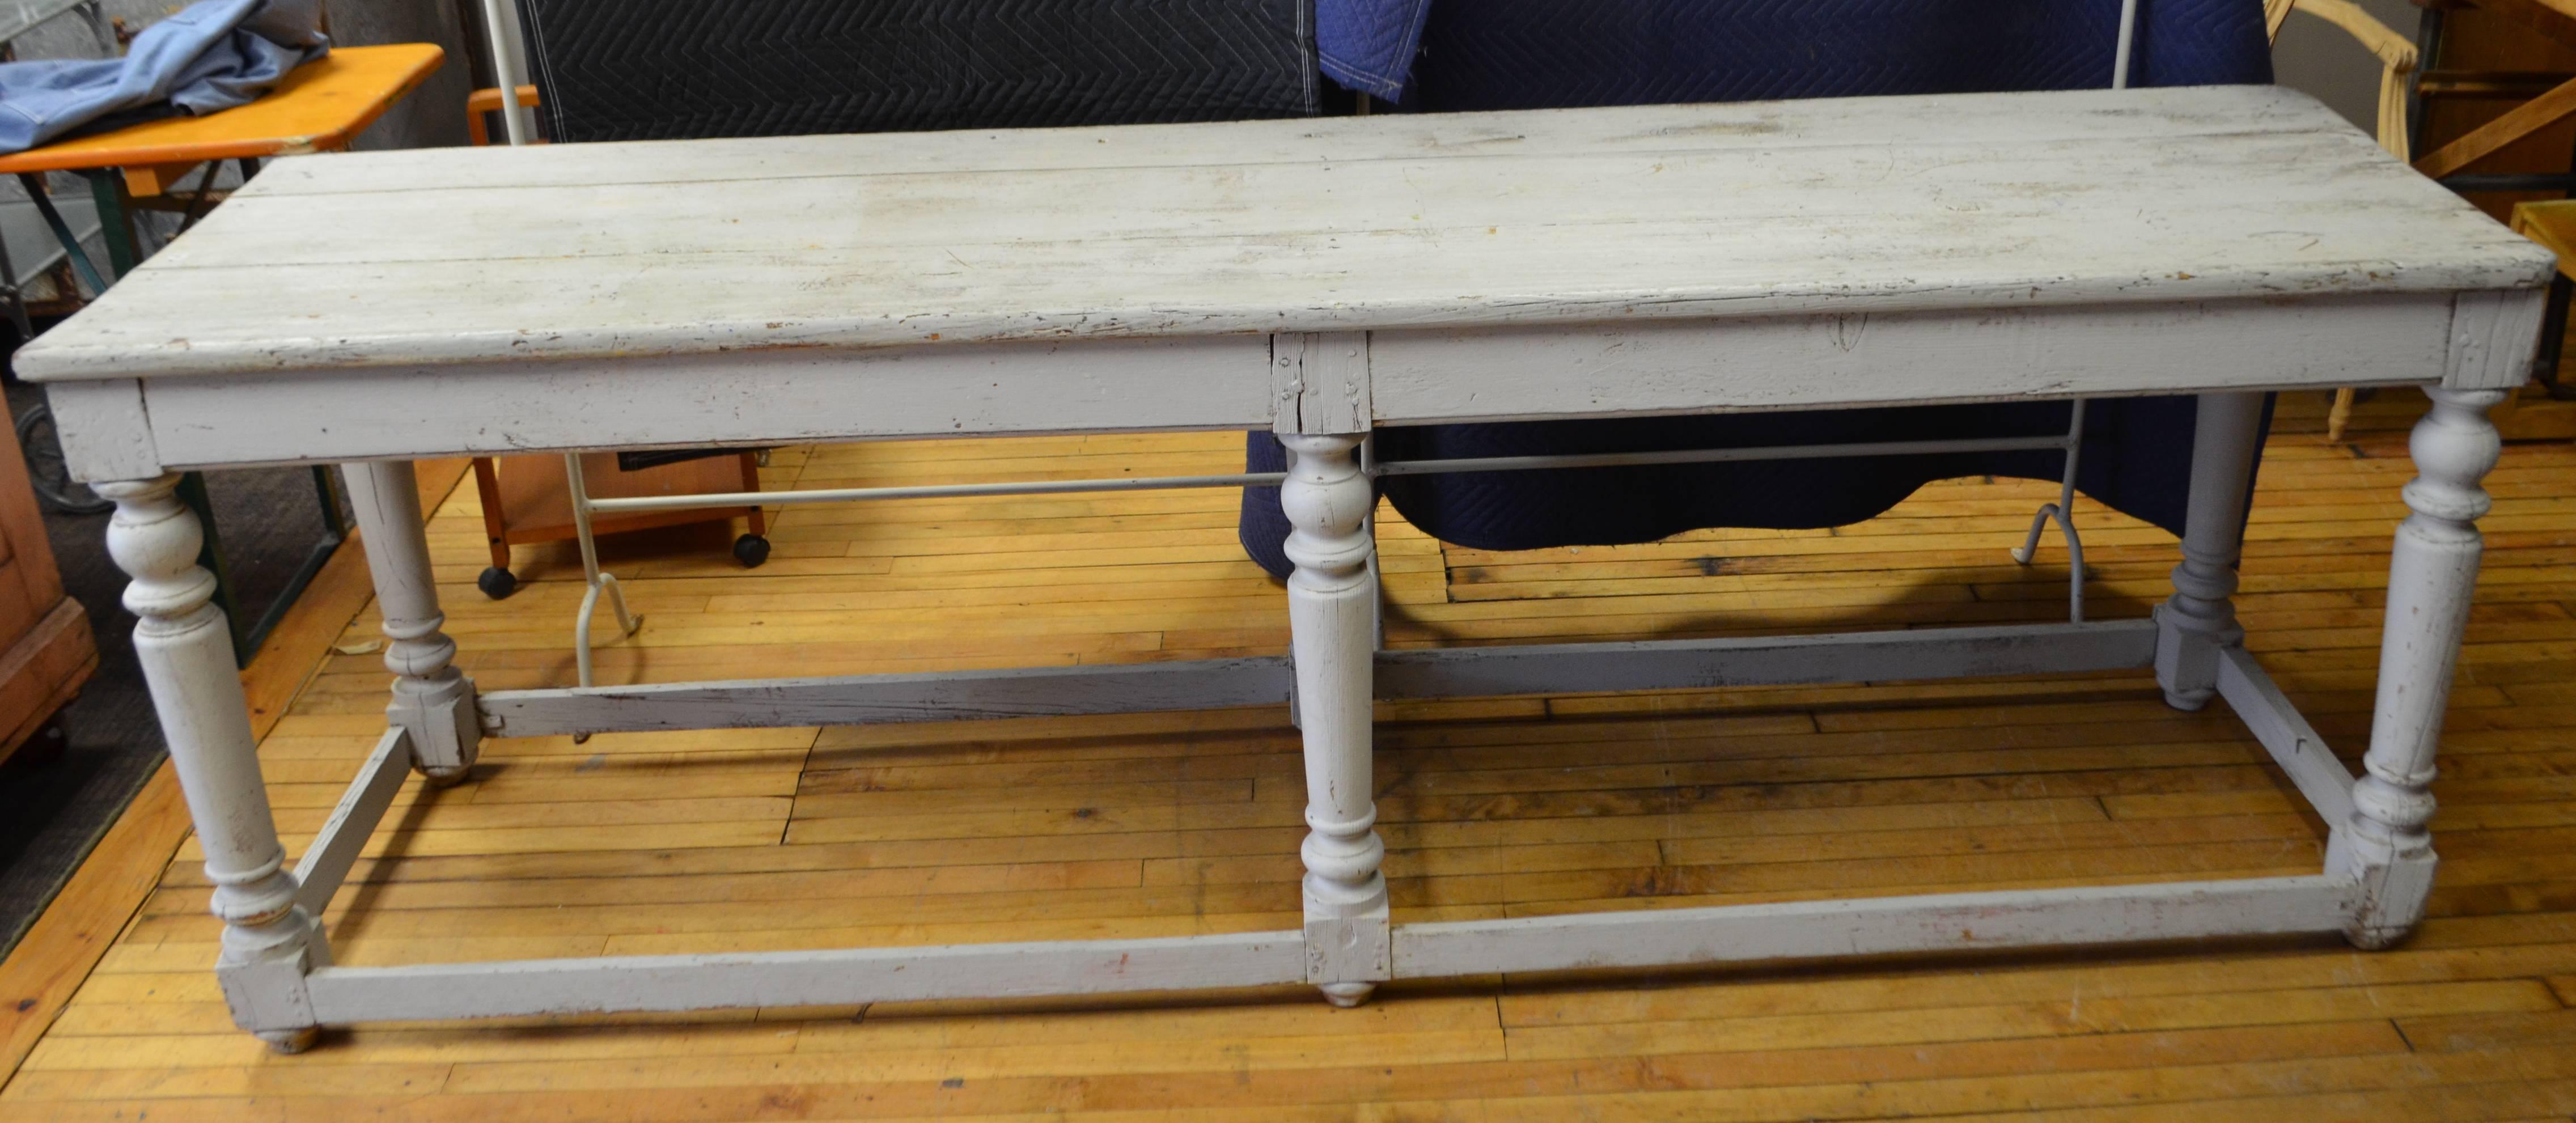 Kitchen island or restaurant prep table or center hall console hails from New Orleans, early 20th century. Wooden plank top with hand- turned support columns. Can be easily-shortened or raised with wheels to height of your choice.